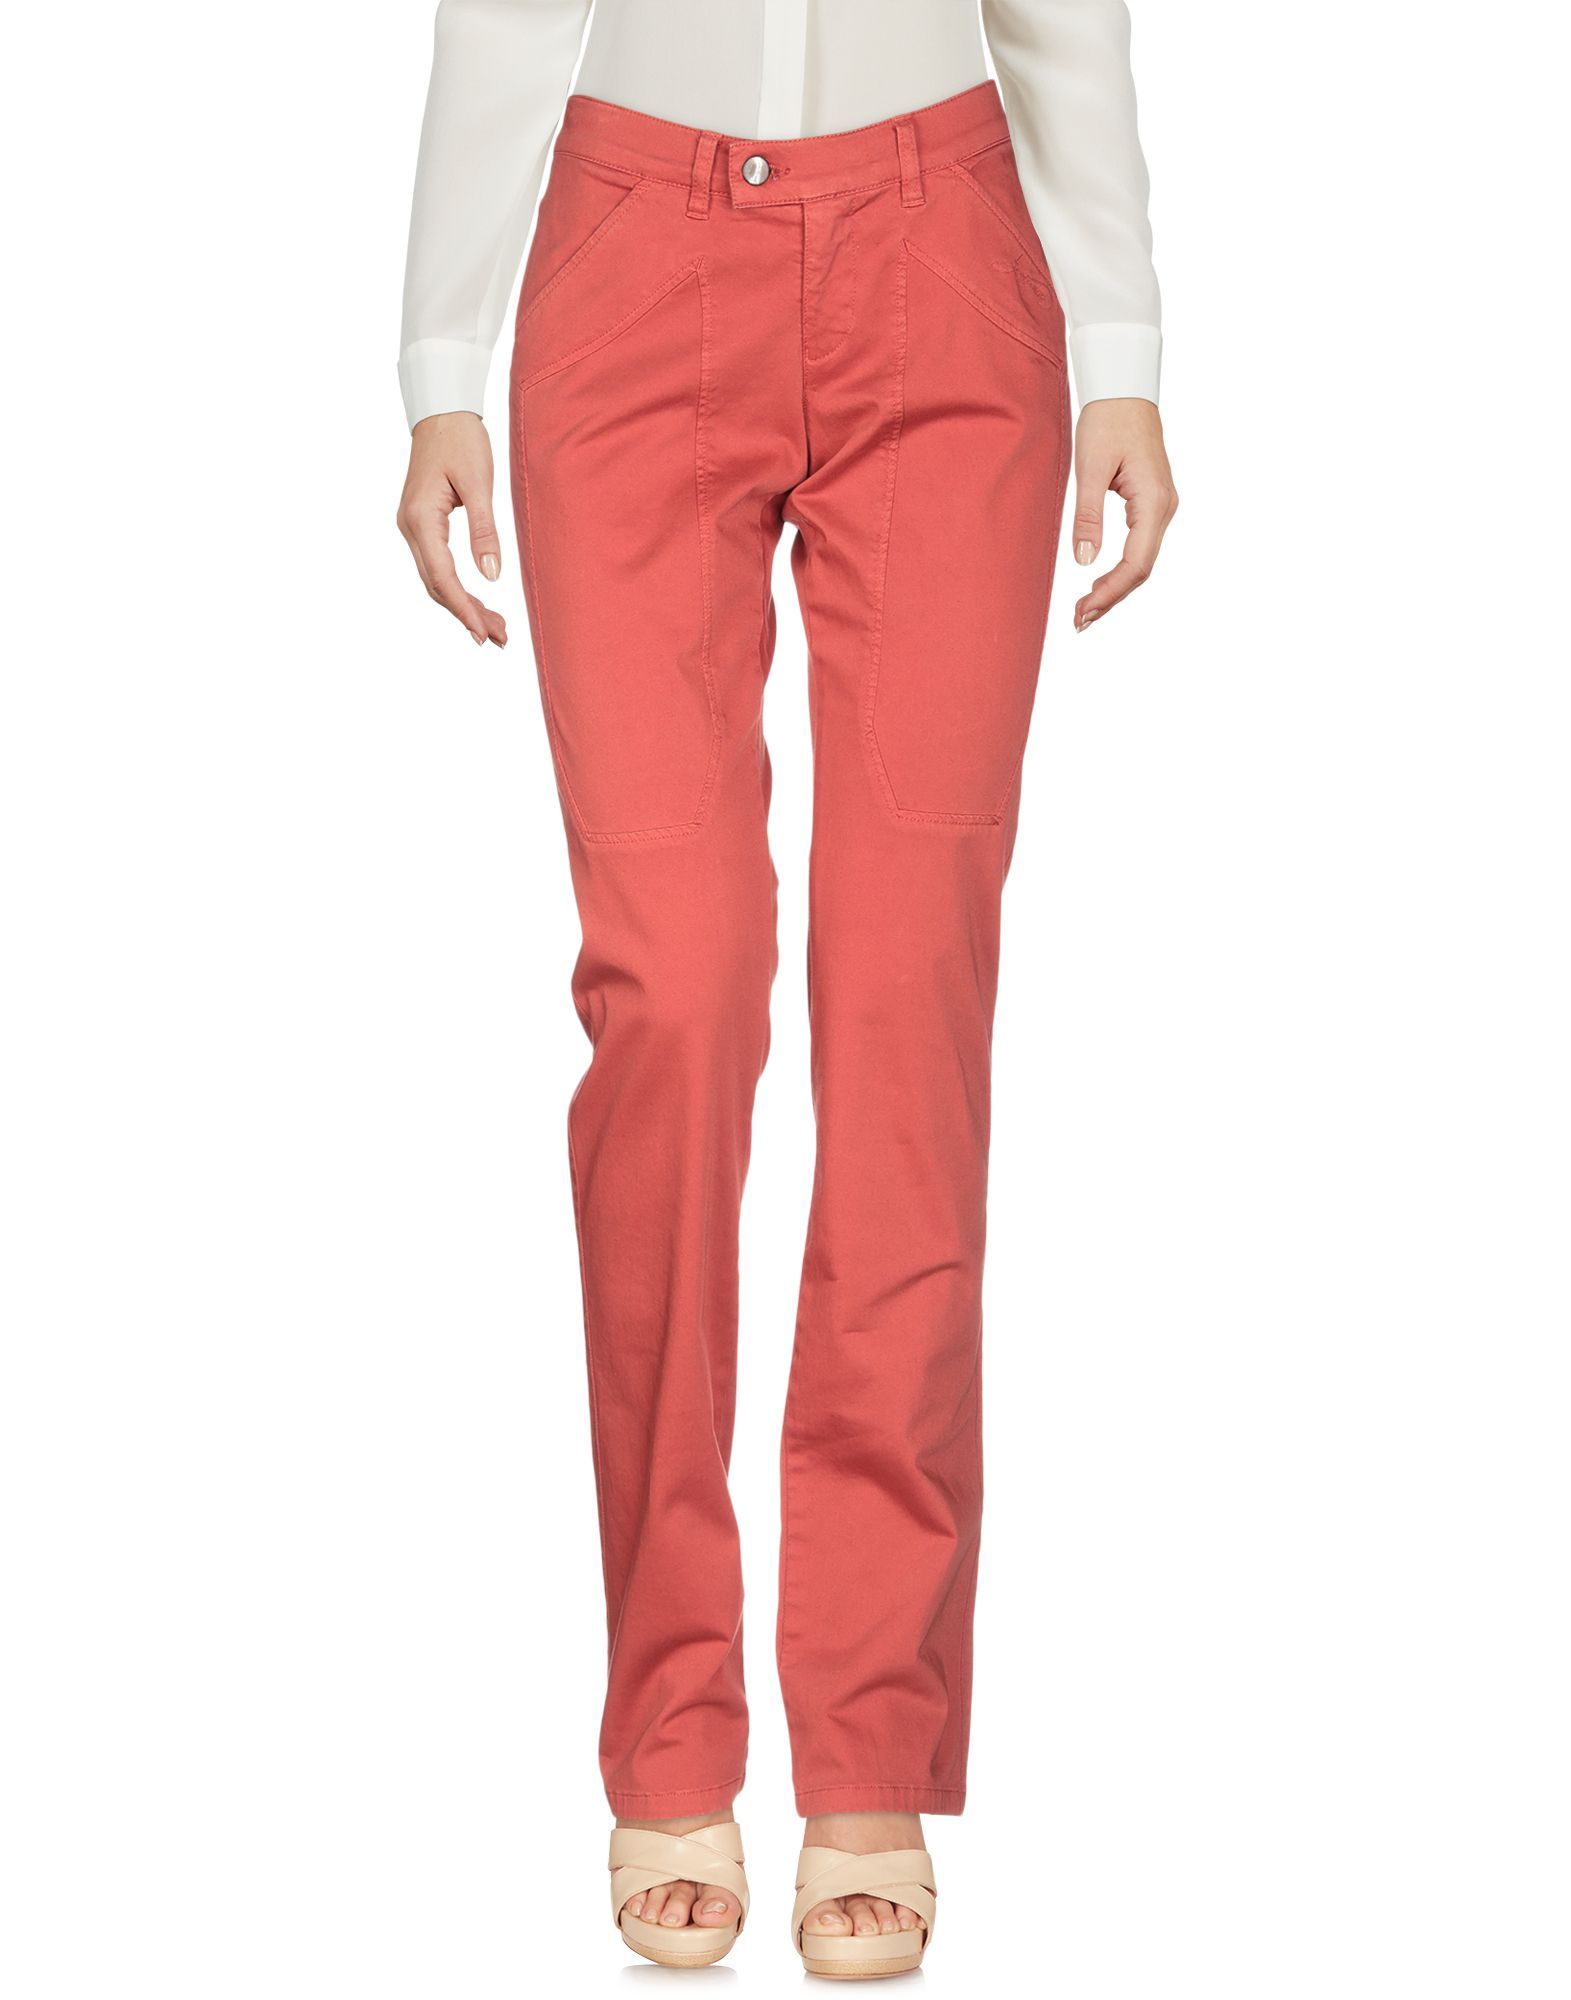 plain weave, logo, basic solid colour, low waisted, regular fit, straight leg, button, zip, multipockets, stretch, 5 pocket